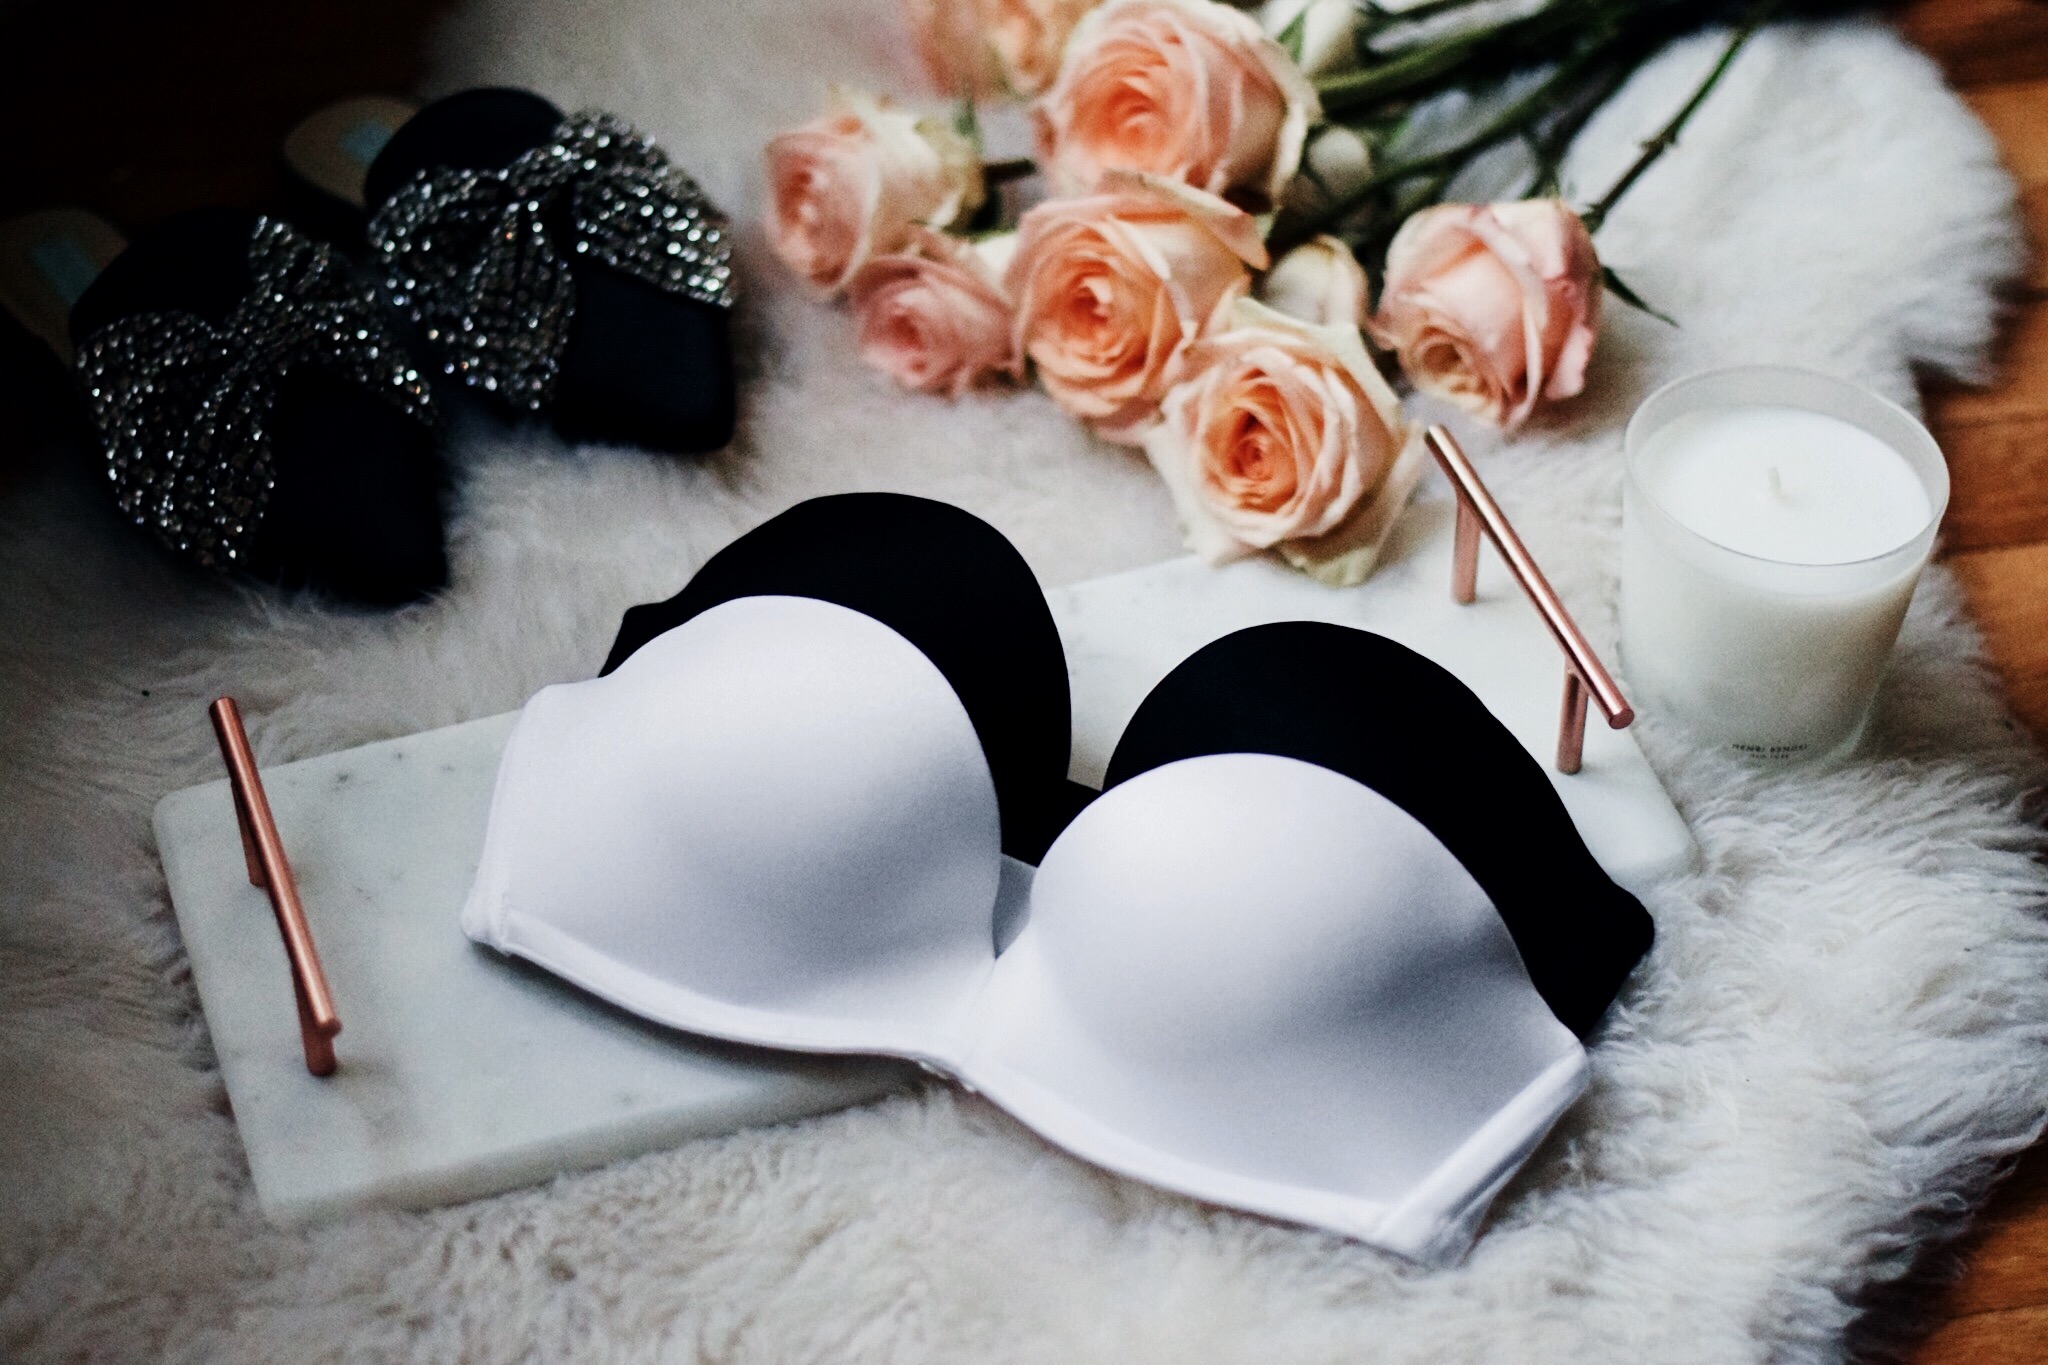 The Perfect Strapless UpBra Esther Santer Fashion Blog NYC Street Style Blogger Outfit OOTD Trendy Flatlay Candle Marble Gold Tray Roses Shoes Fur Sheepskin Strapless Bra Essentials The Right Fit Girl Women Flowers Beautiful White Pink Black Neutral.jpg